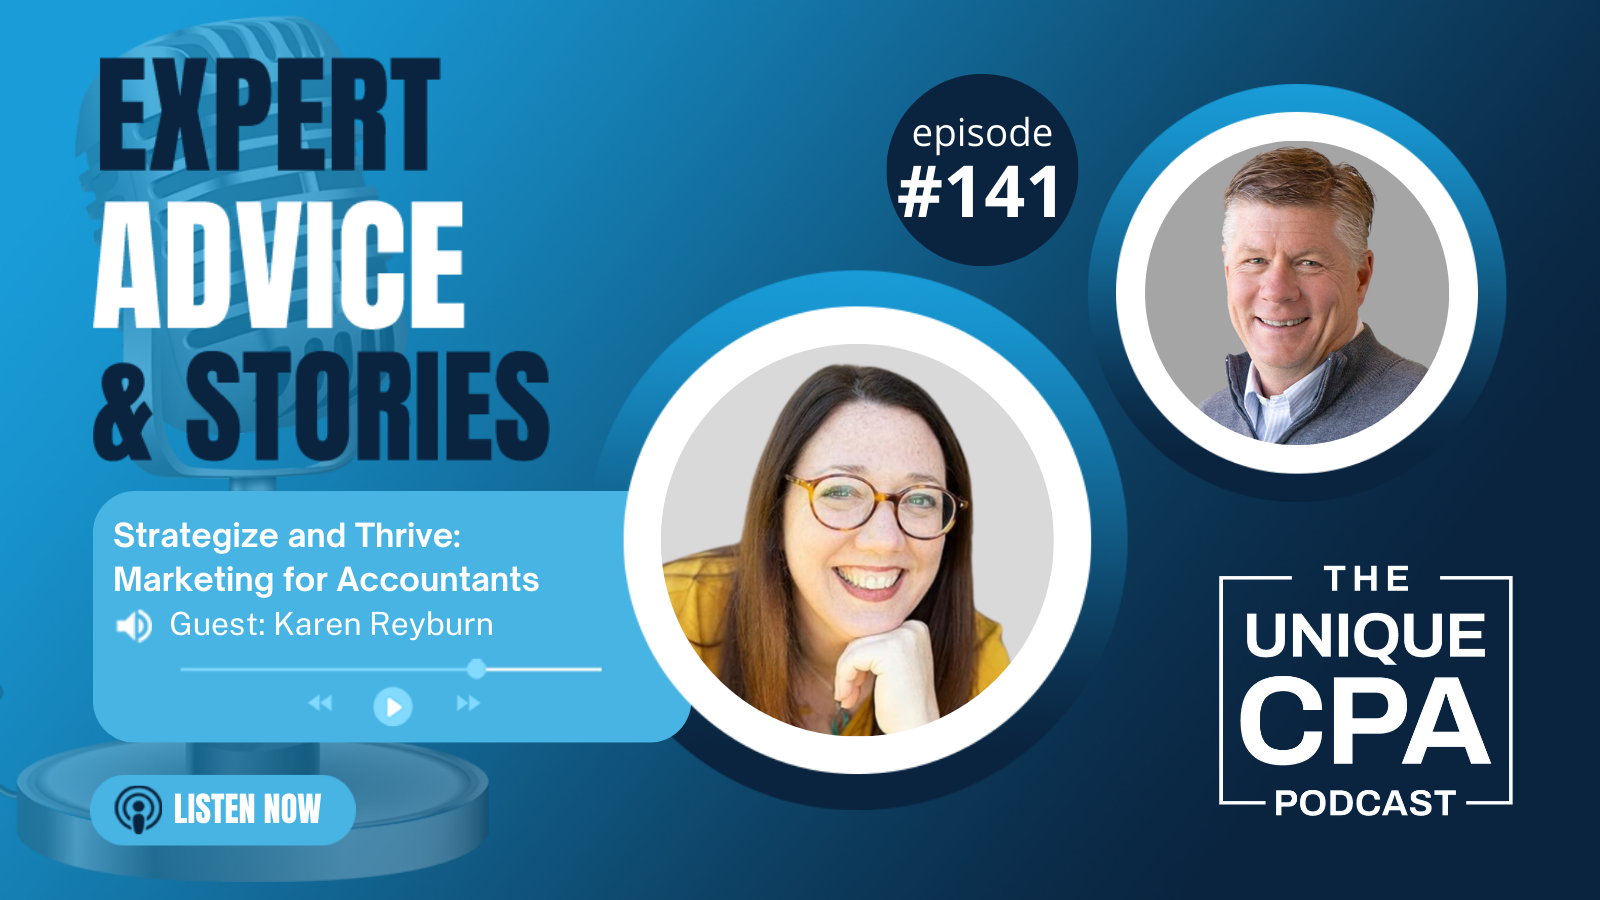 Unique Cpa Featured Image Ep 141 Karen Reyburn - Strategize And Thrive - Tri-Merit